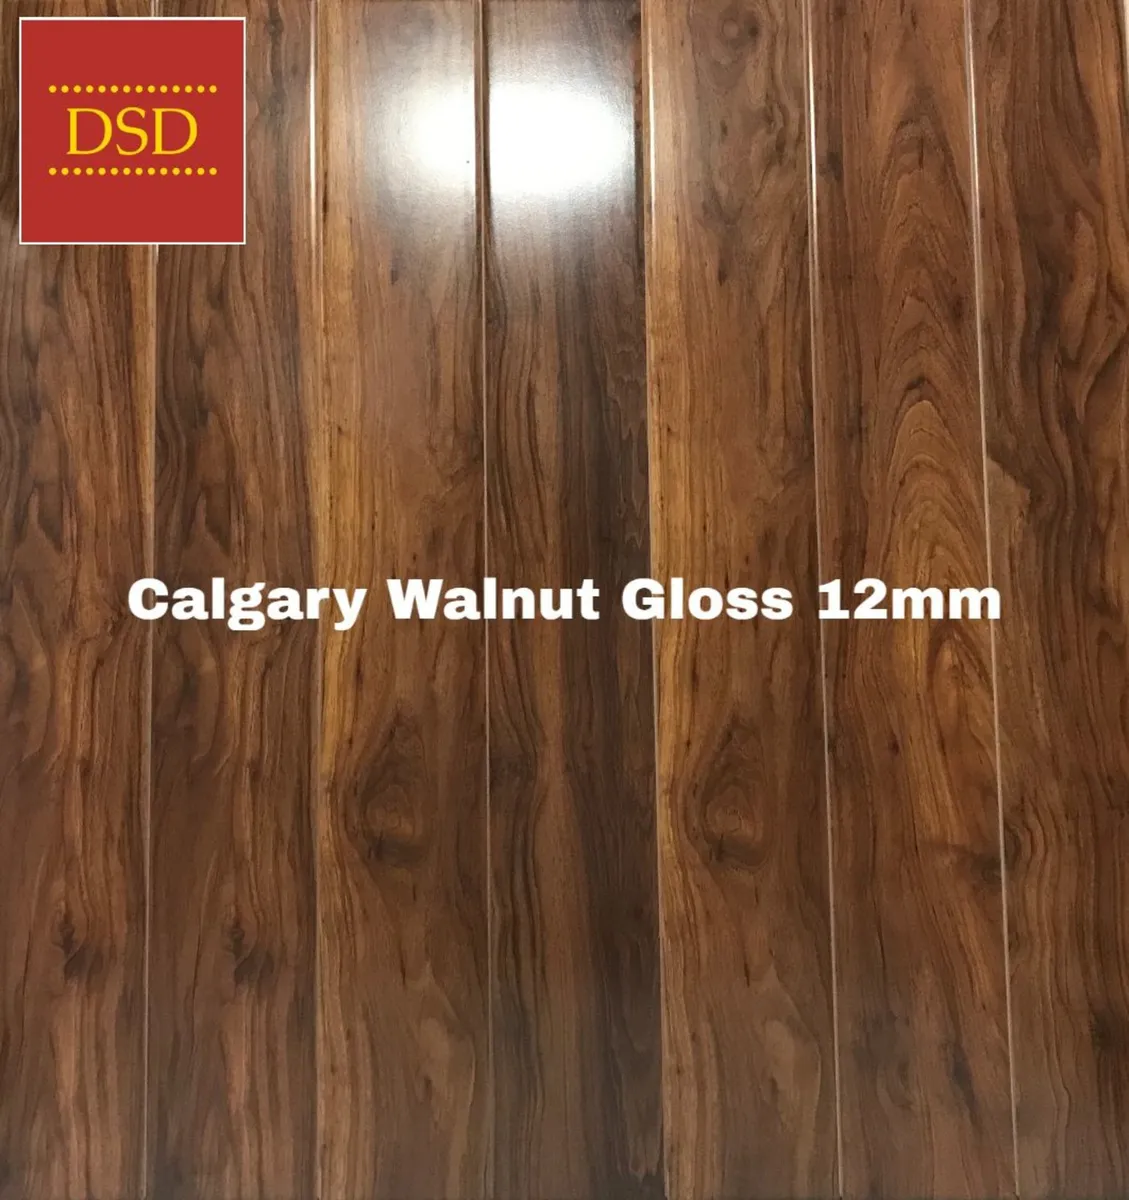 Calgary Walnut 12mm Flooring - Nationwide Delivery - Image 1